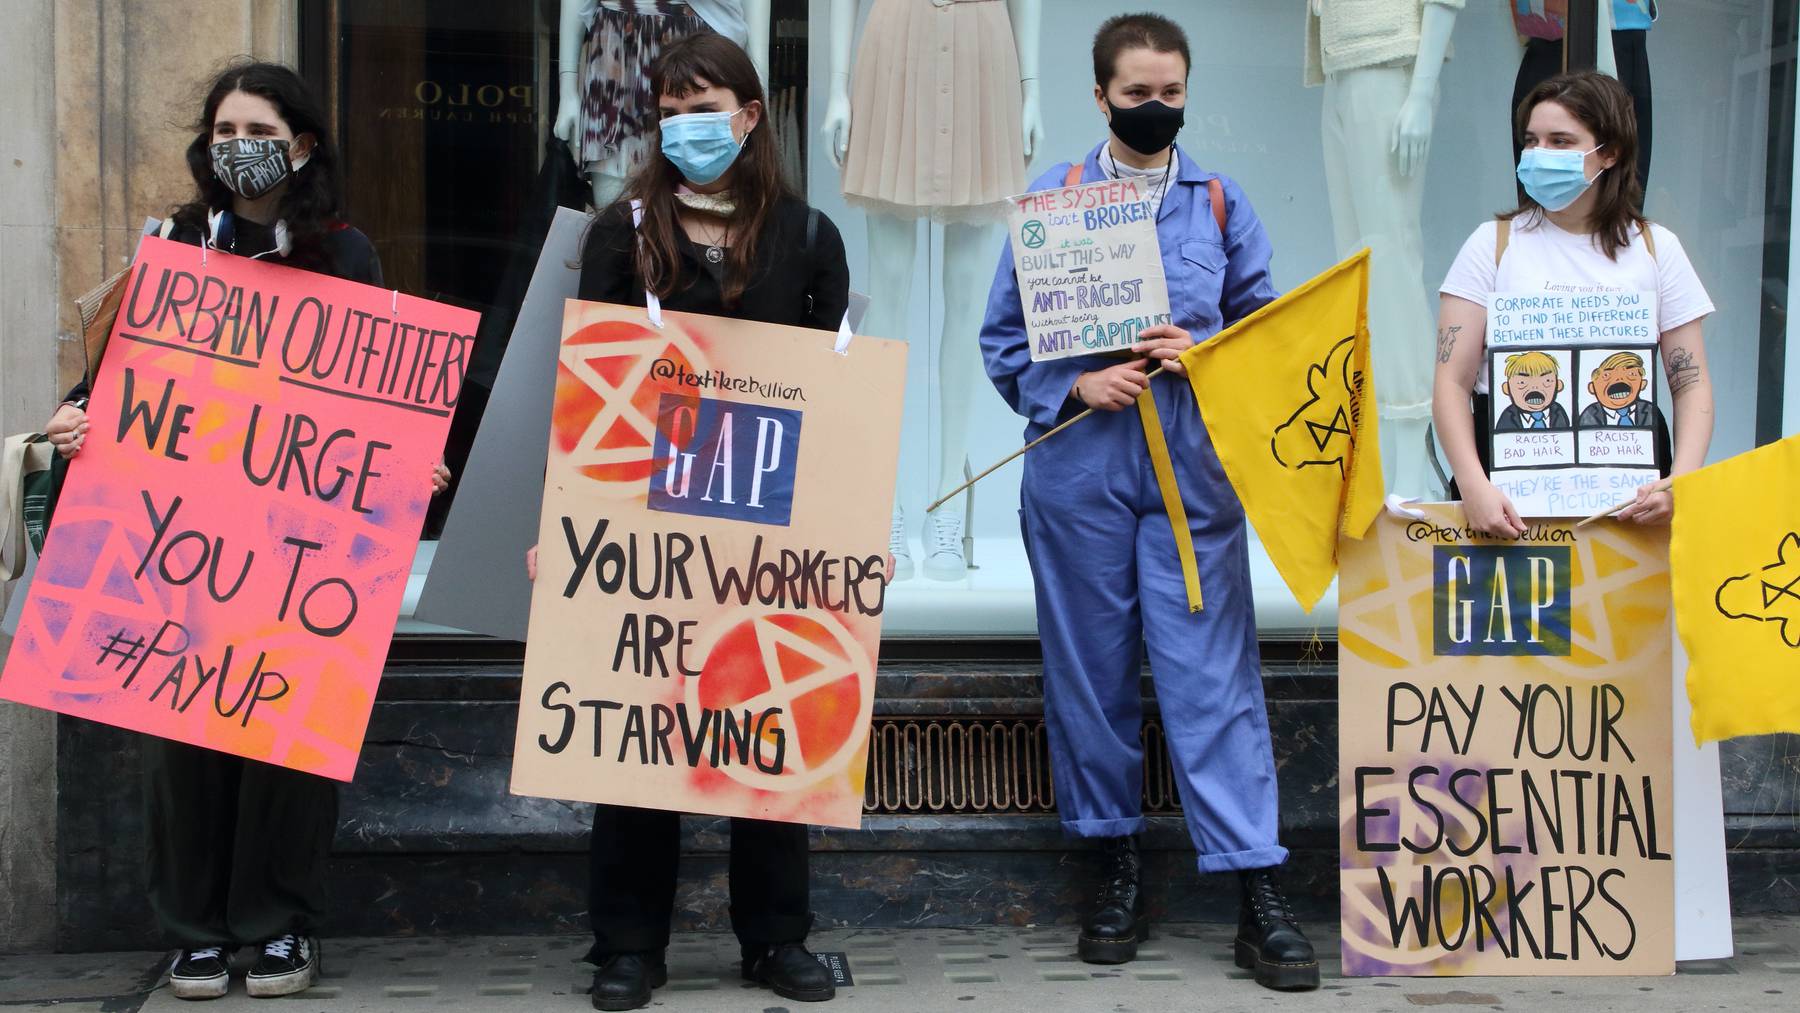 Activists hold placards during a demonstration in London's Regent Street Gap Urban Outfitters